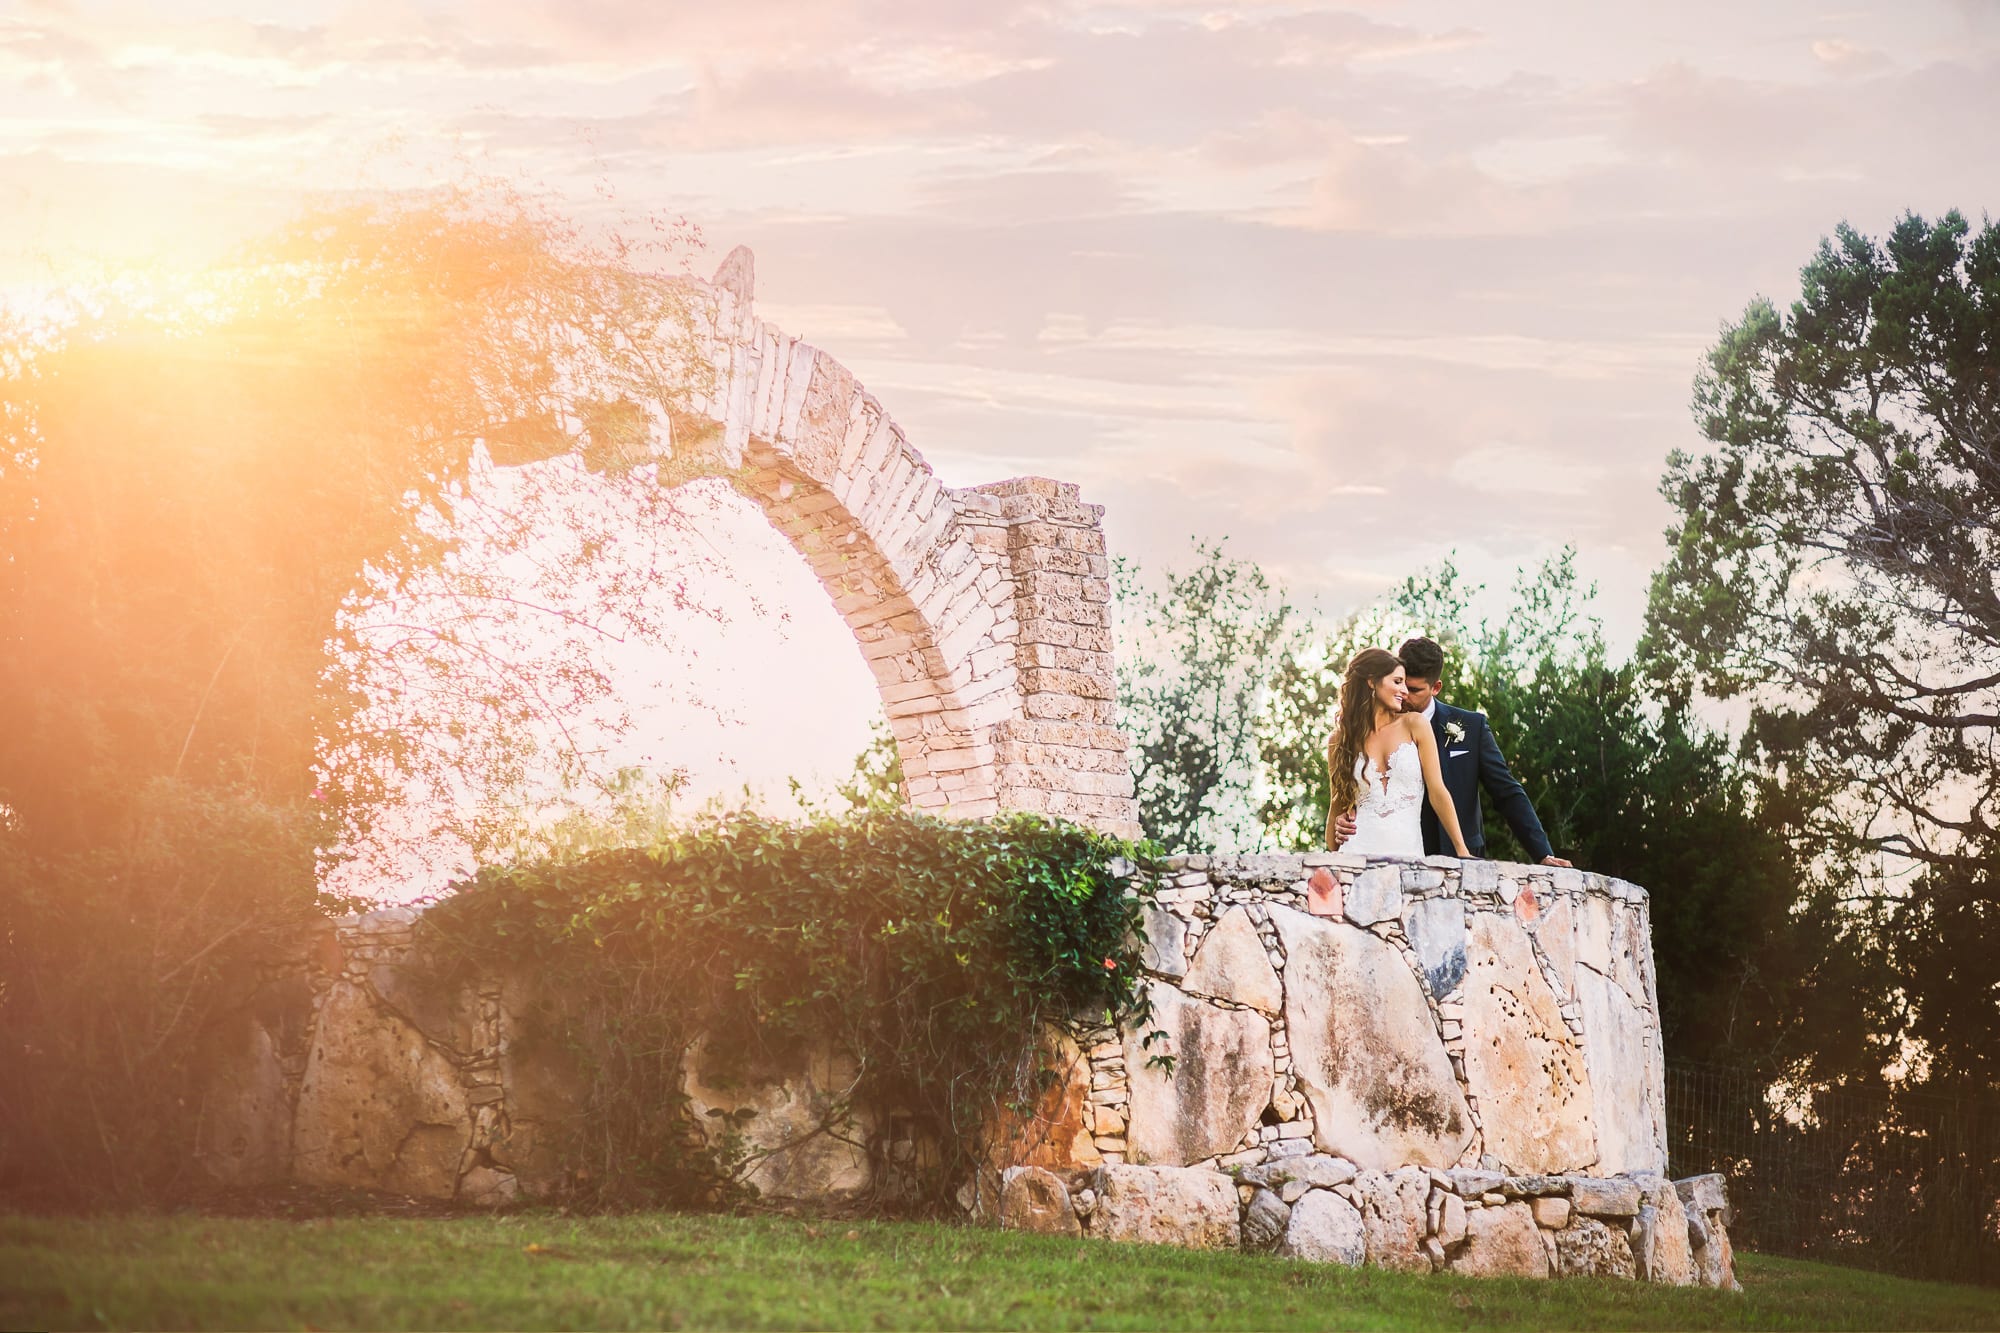 Bride and groom flirt while on edge of hill country view